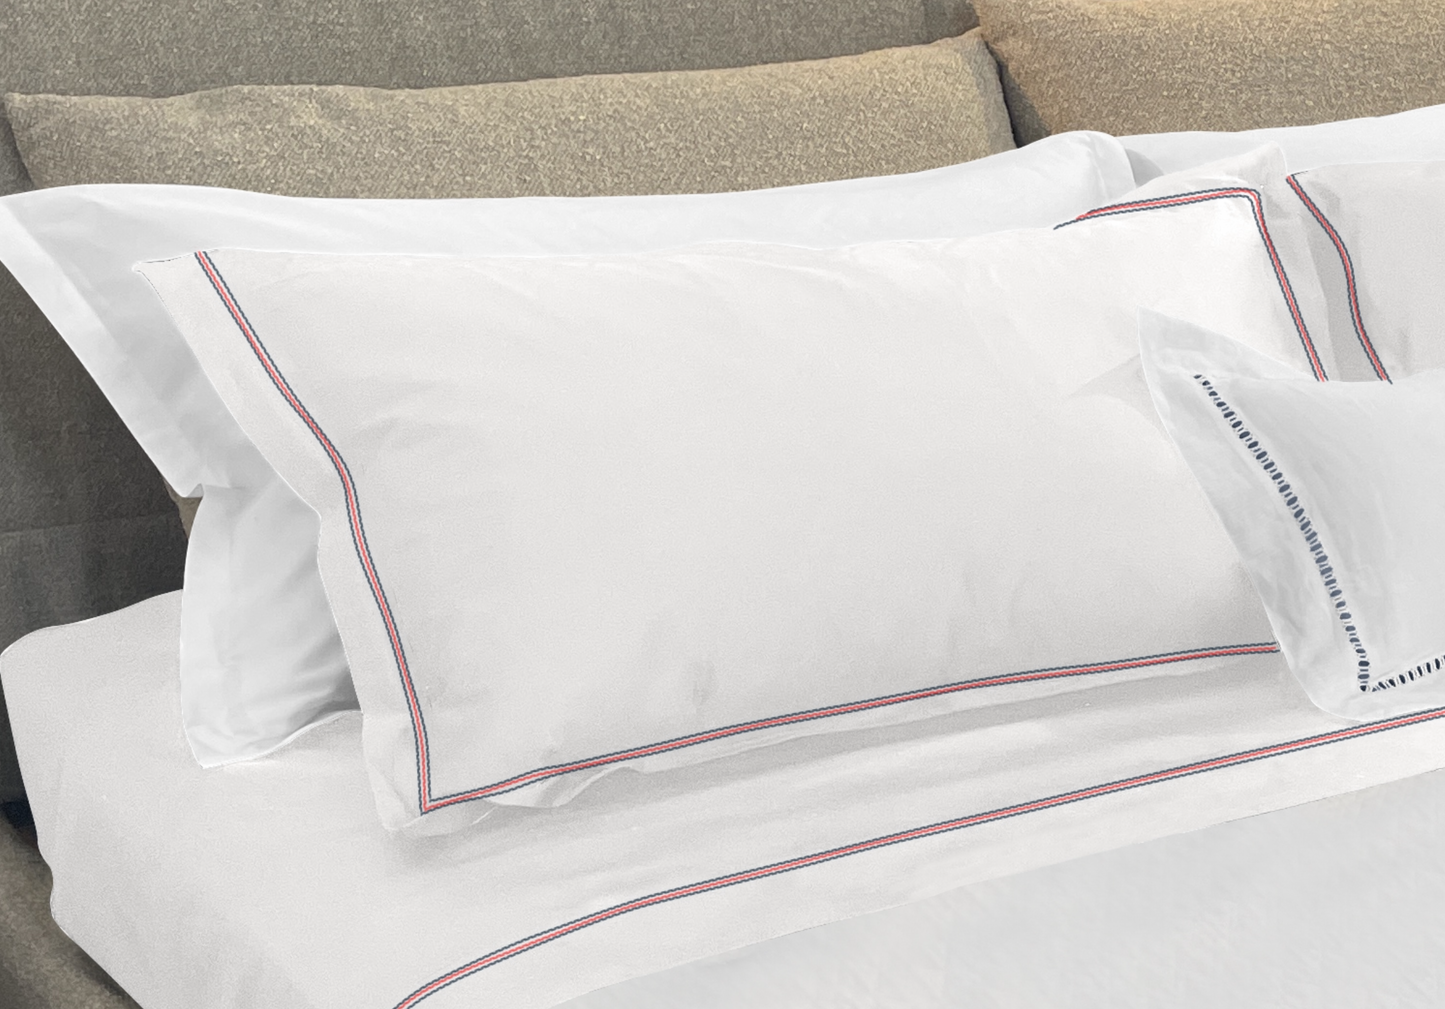 Narragansett White Pillow Sham with a triple contrasting stitch in Deep Sea, Red and Deep Sea. It is shown with our Daily Basics 300tc Egyptian Cotton Sateen Sleeping Sham in White. 